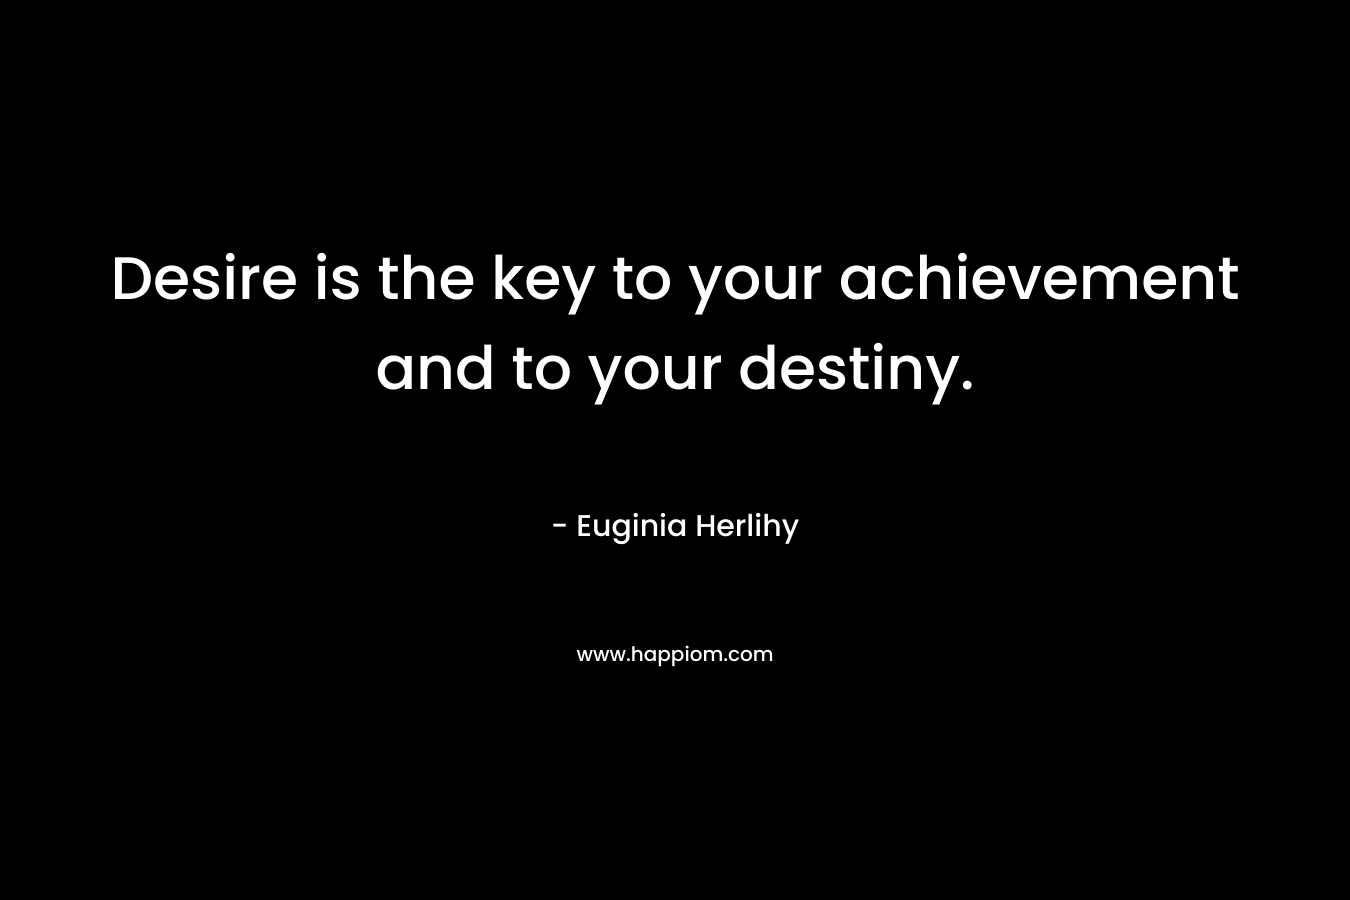 Desire is the key to your achievement and to your destiny. – Euginia Herlihy